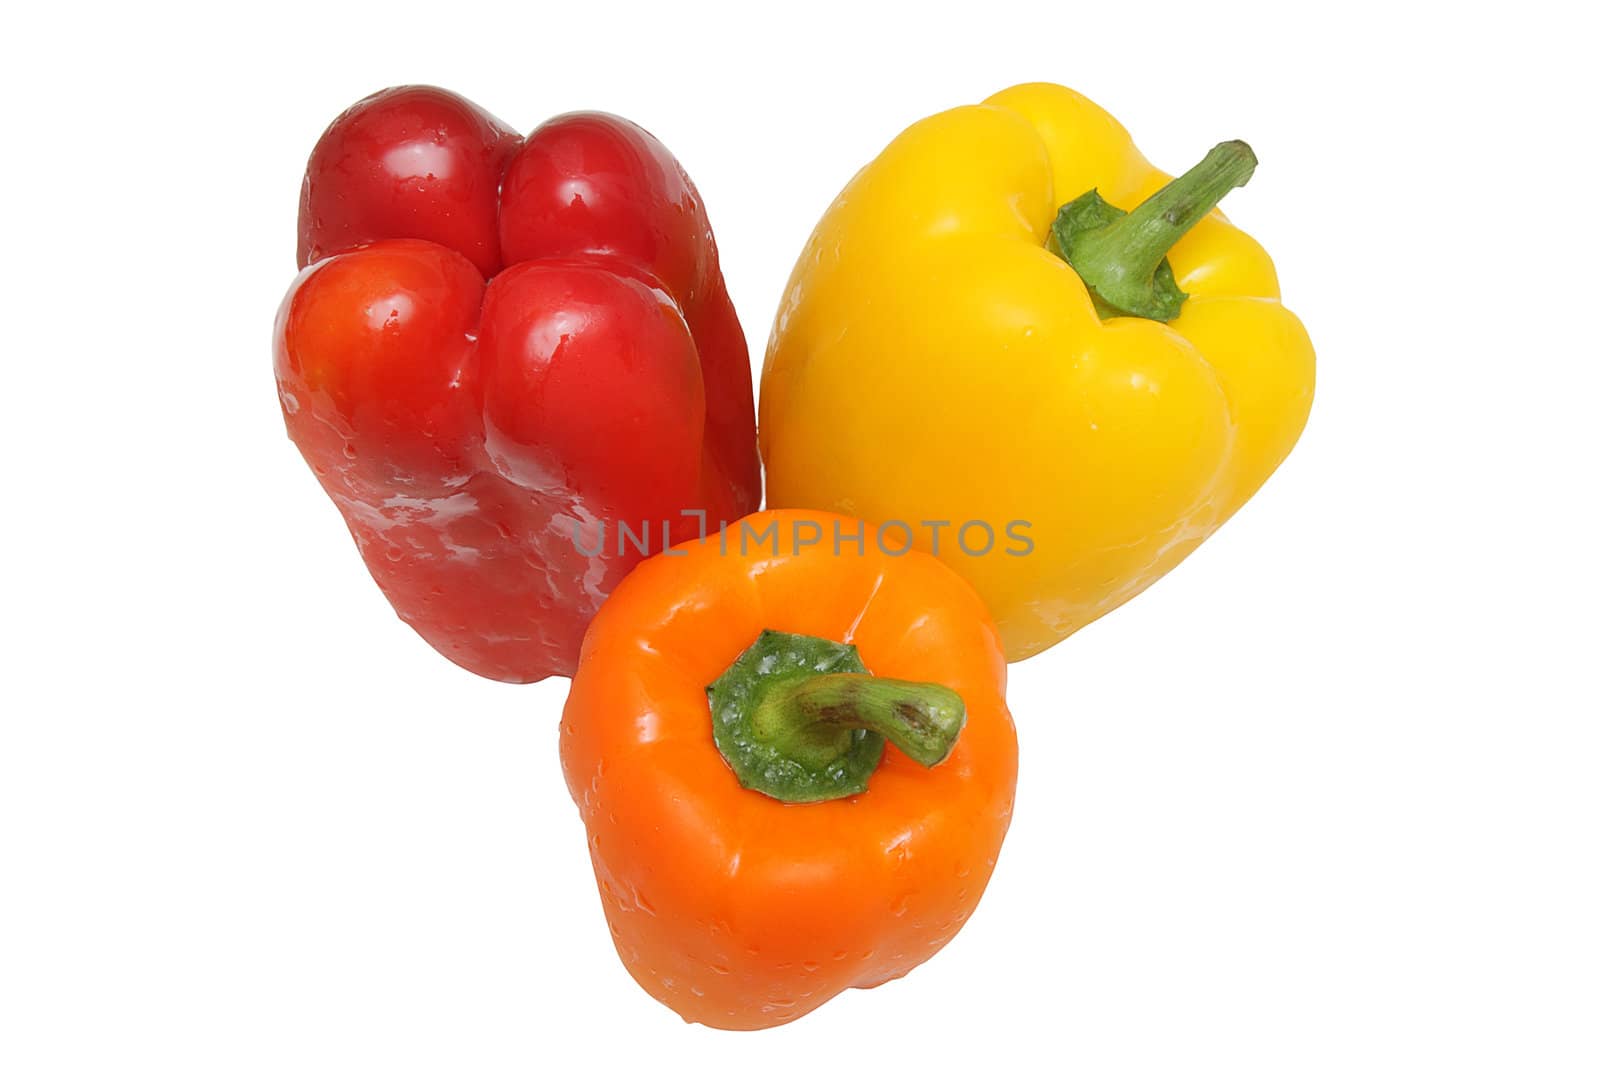 Three peppers of different colors isolated on white background